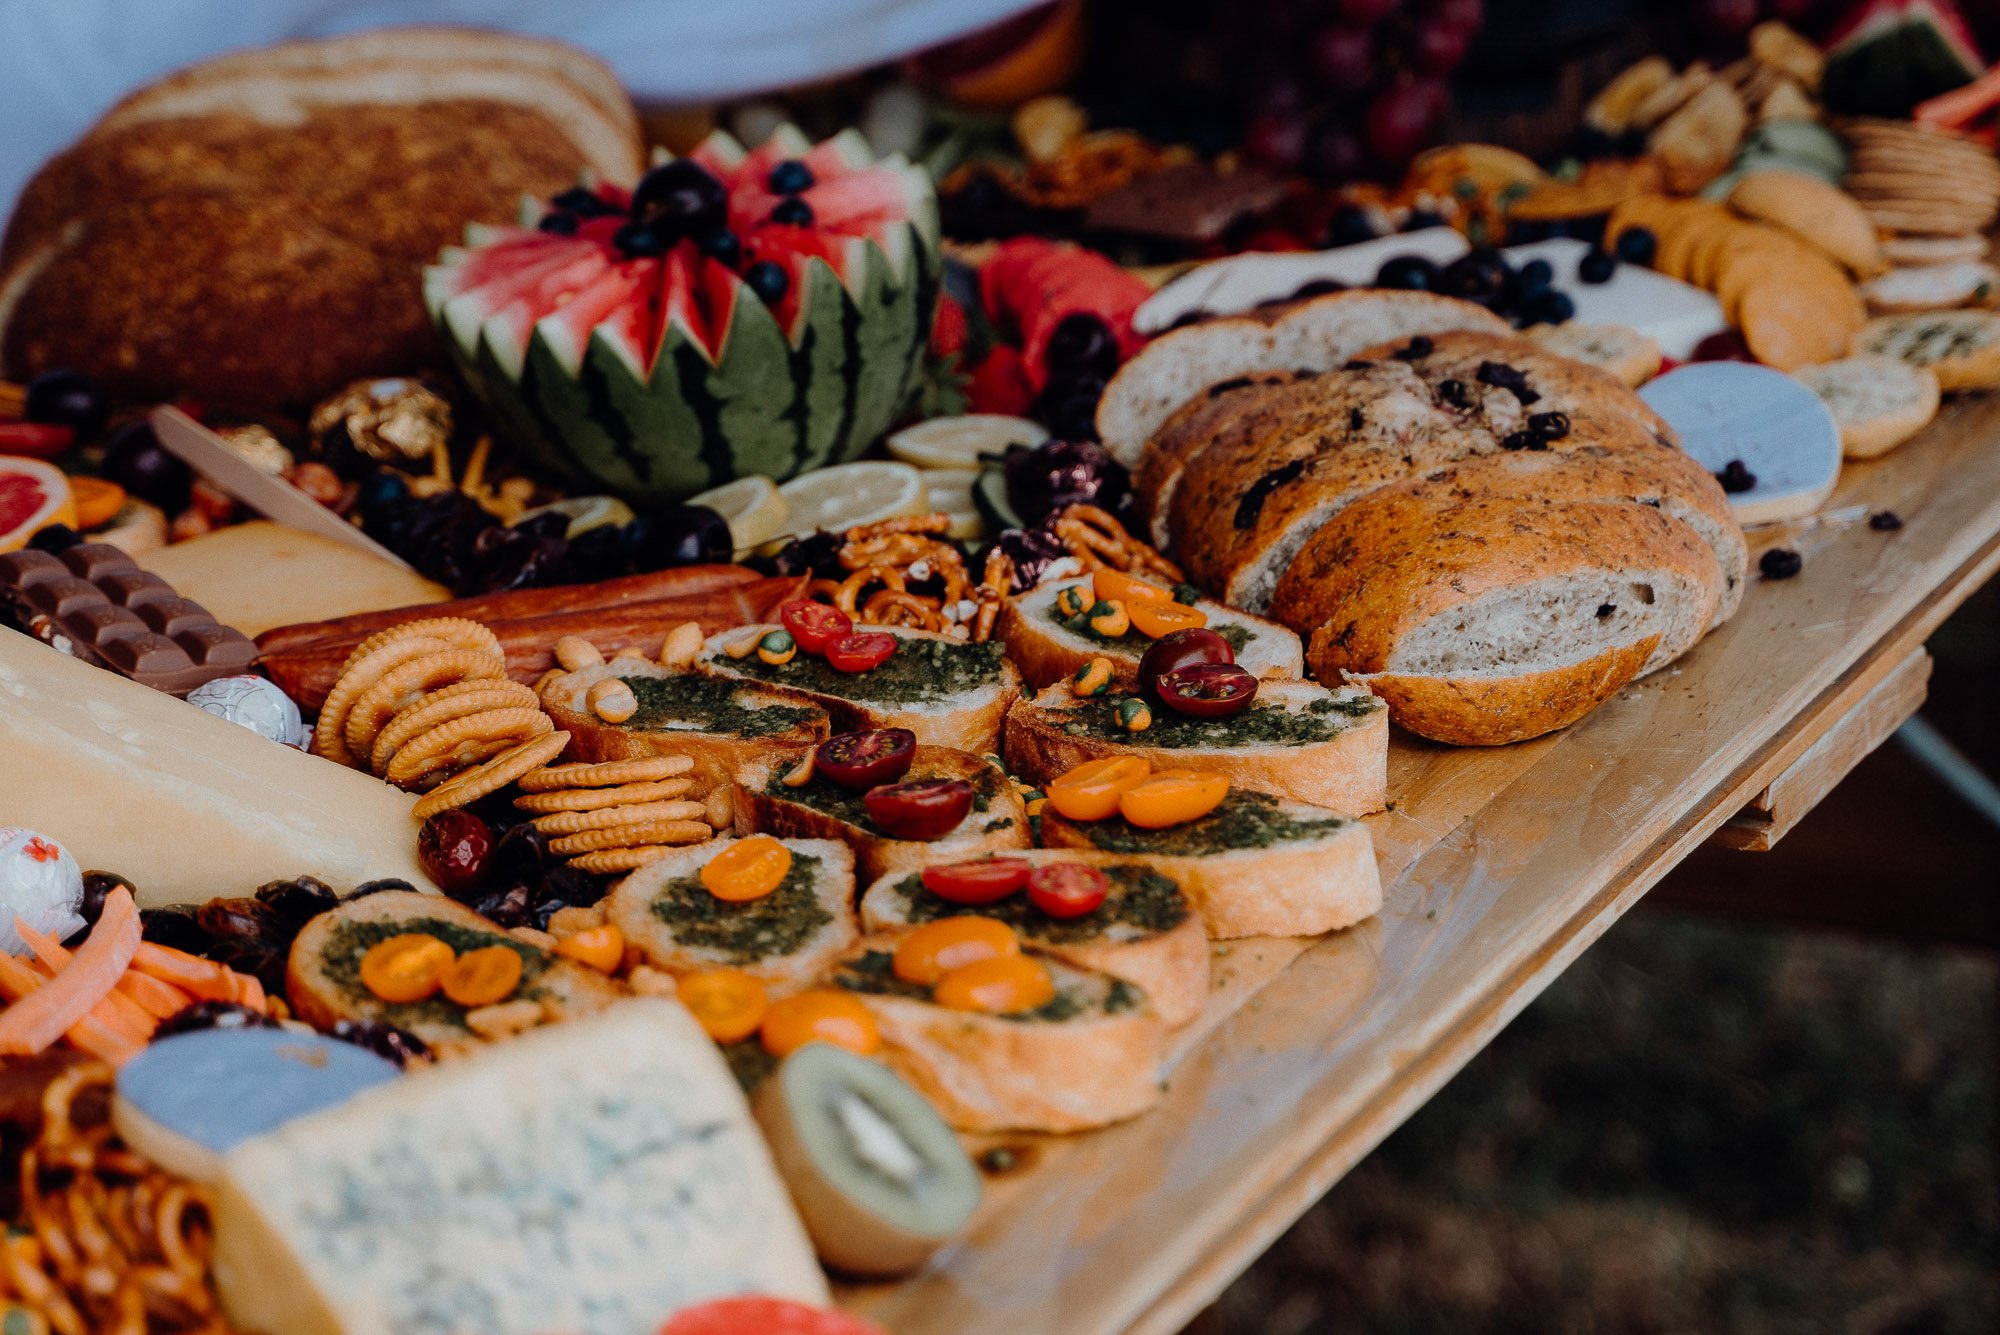 Wedding Photography Of Grazing Table Ideas 007, lots of bread and dips as well as fresh and dried fruits